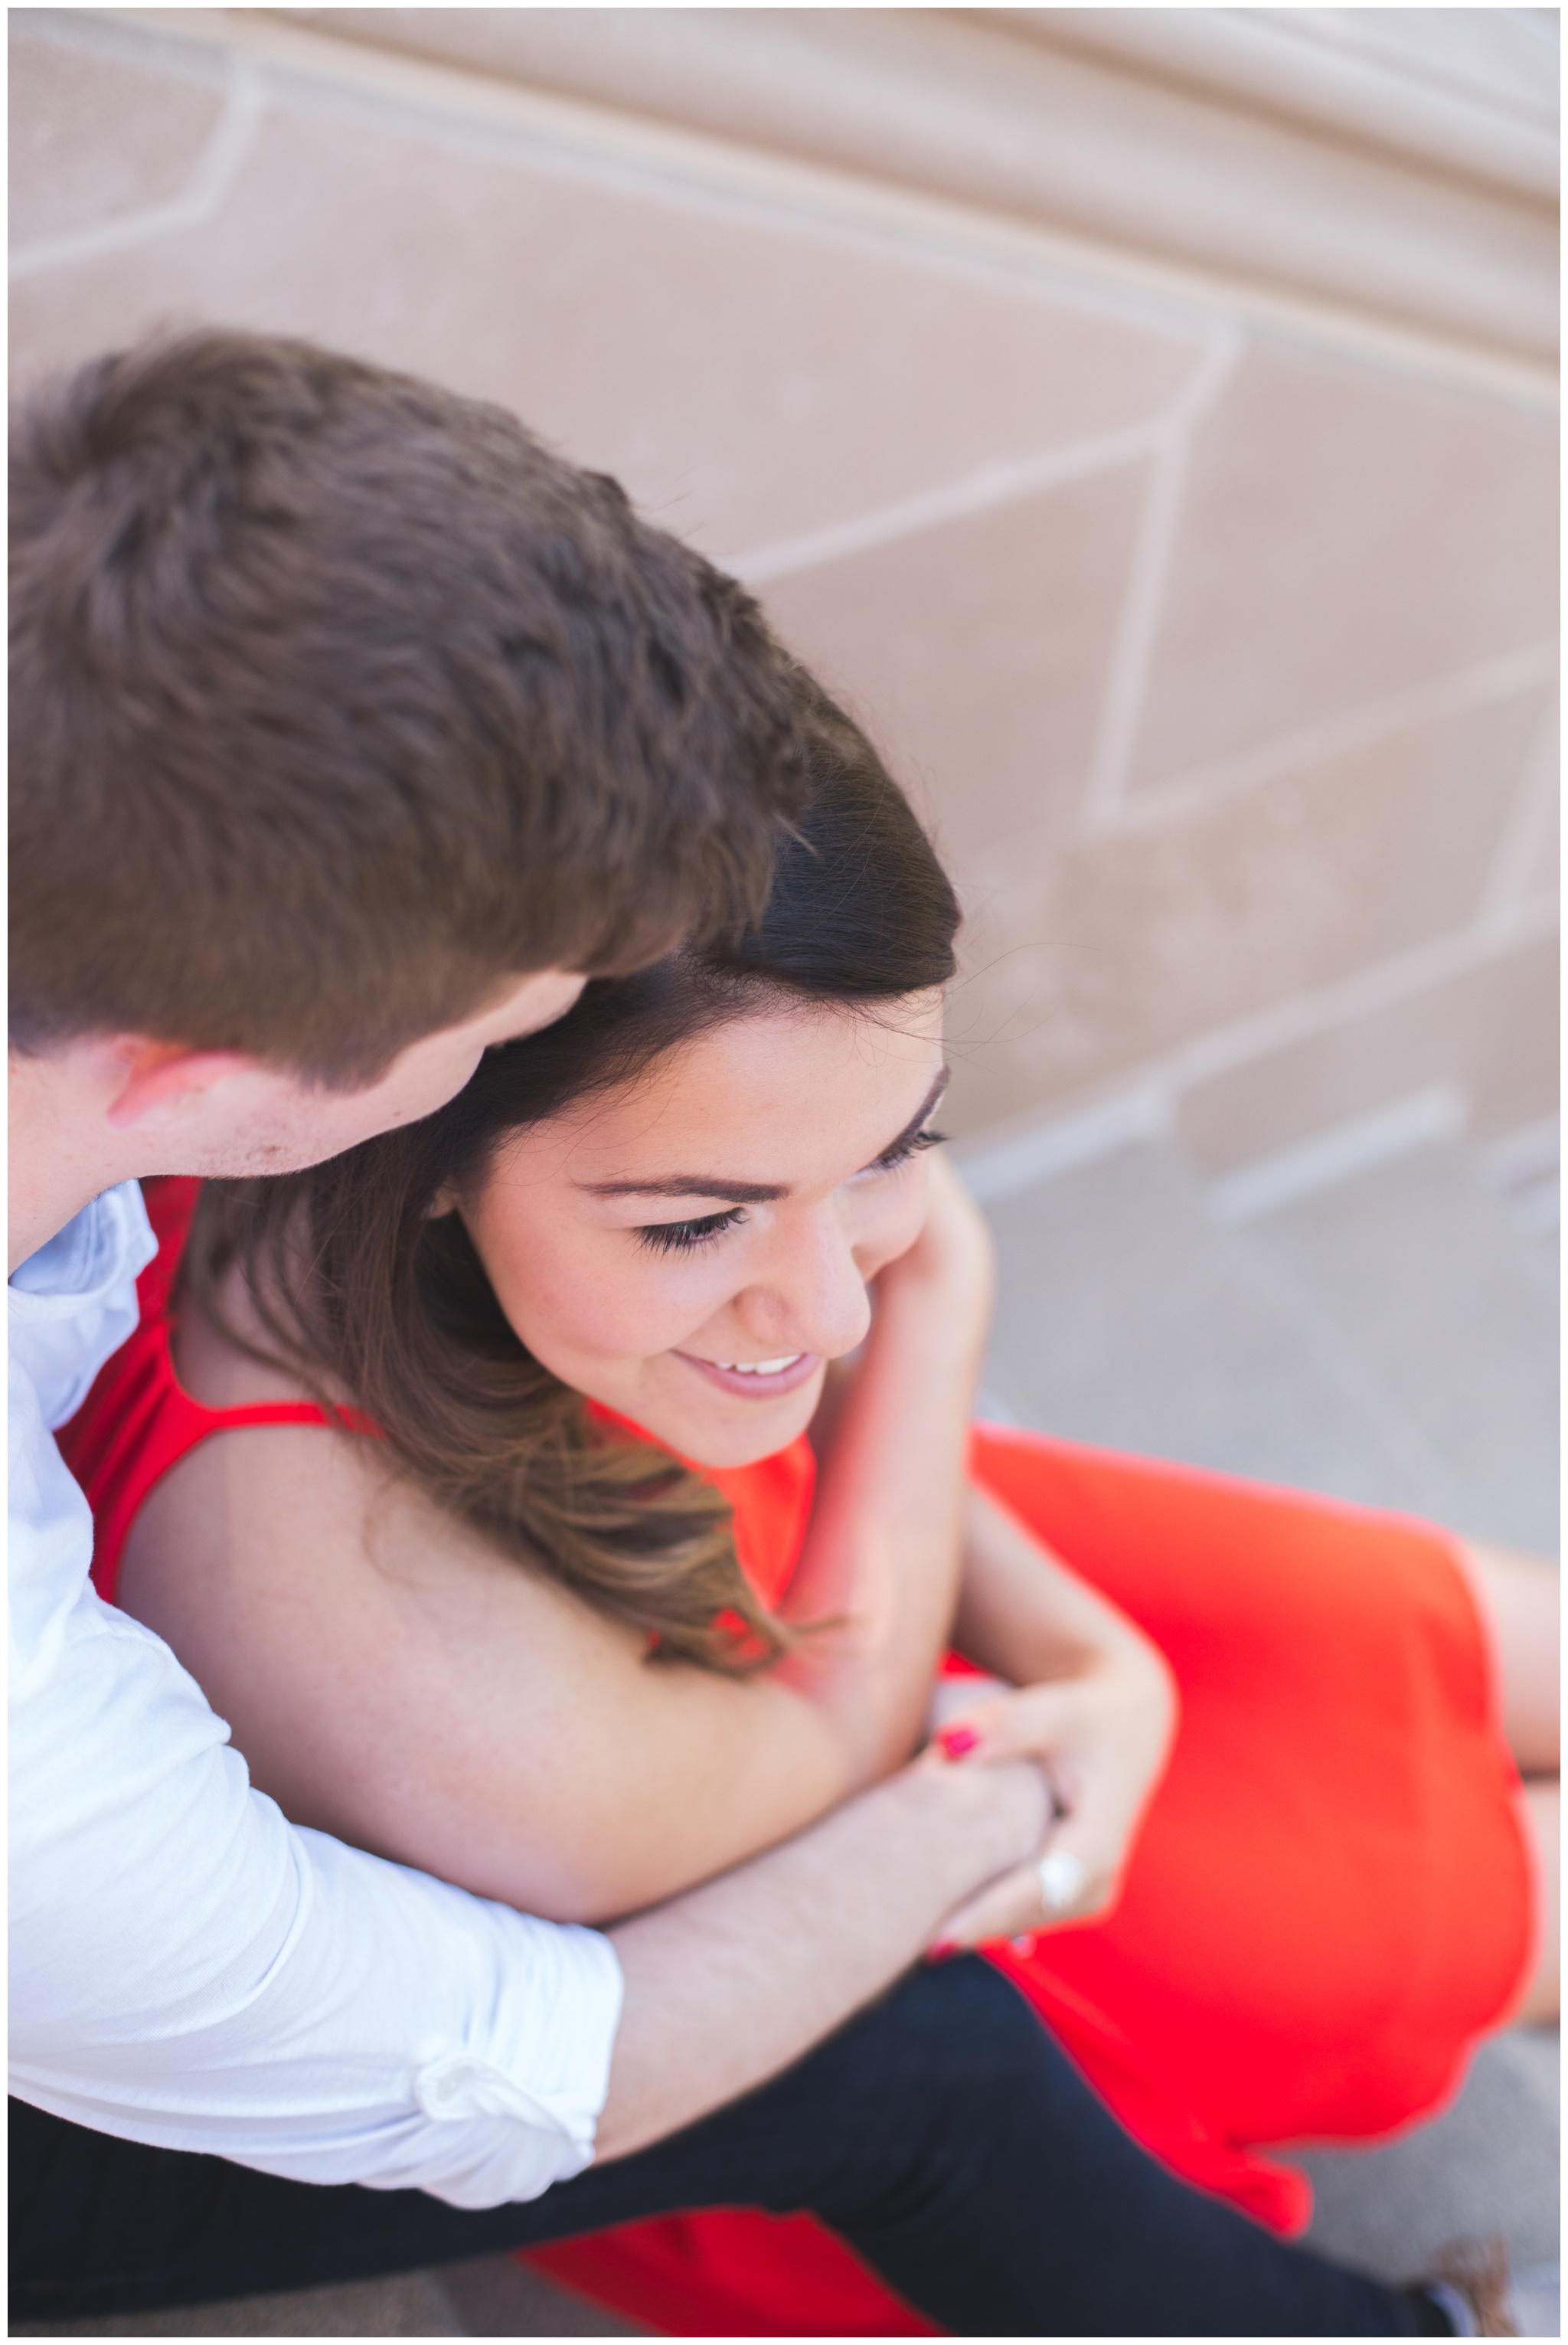 Muncie Indiana engagement session at Ball State University